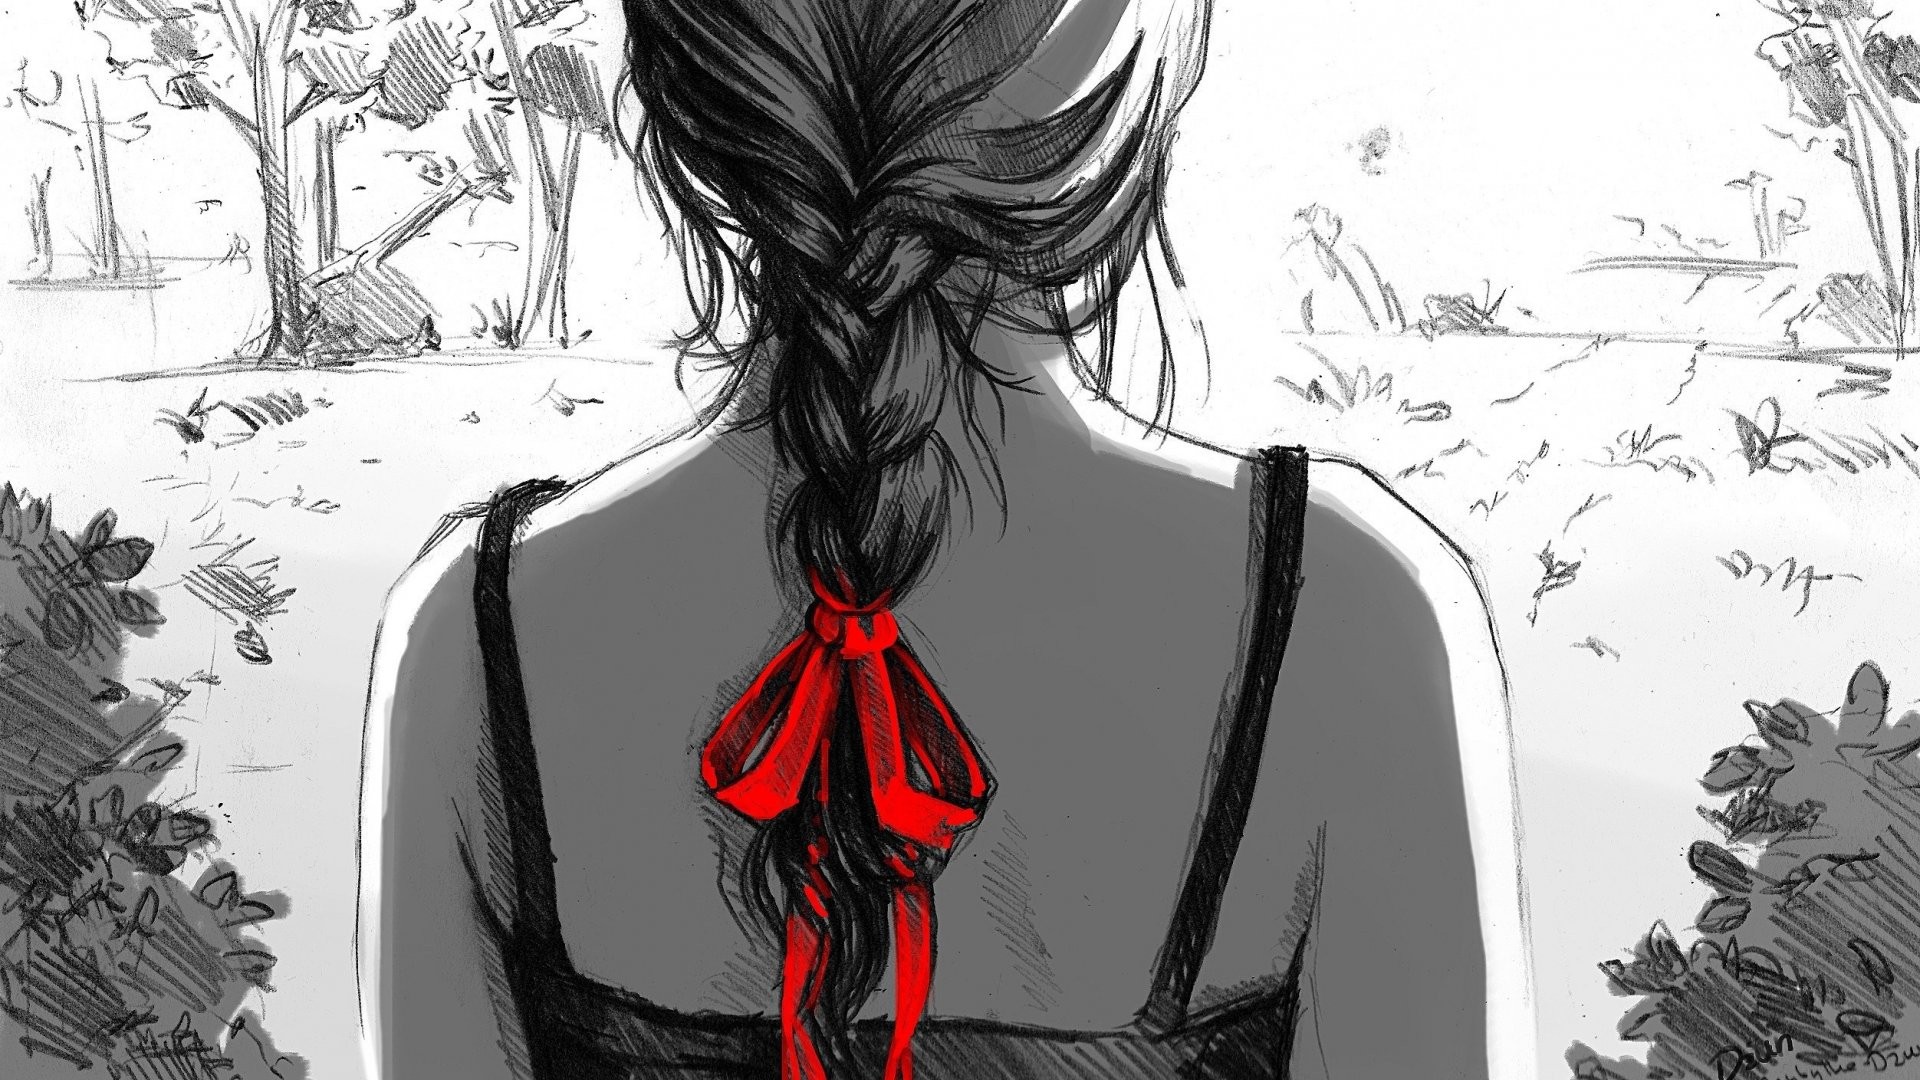 Anime 1920x1080 selective coloring artwork red ribbon women back women outdoors sketches rear view braids looking away trees leaves